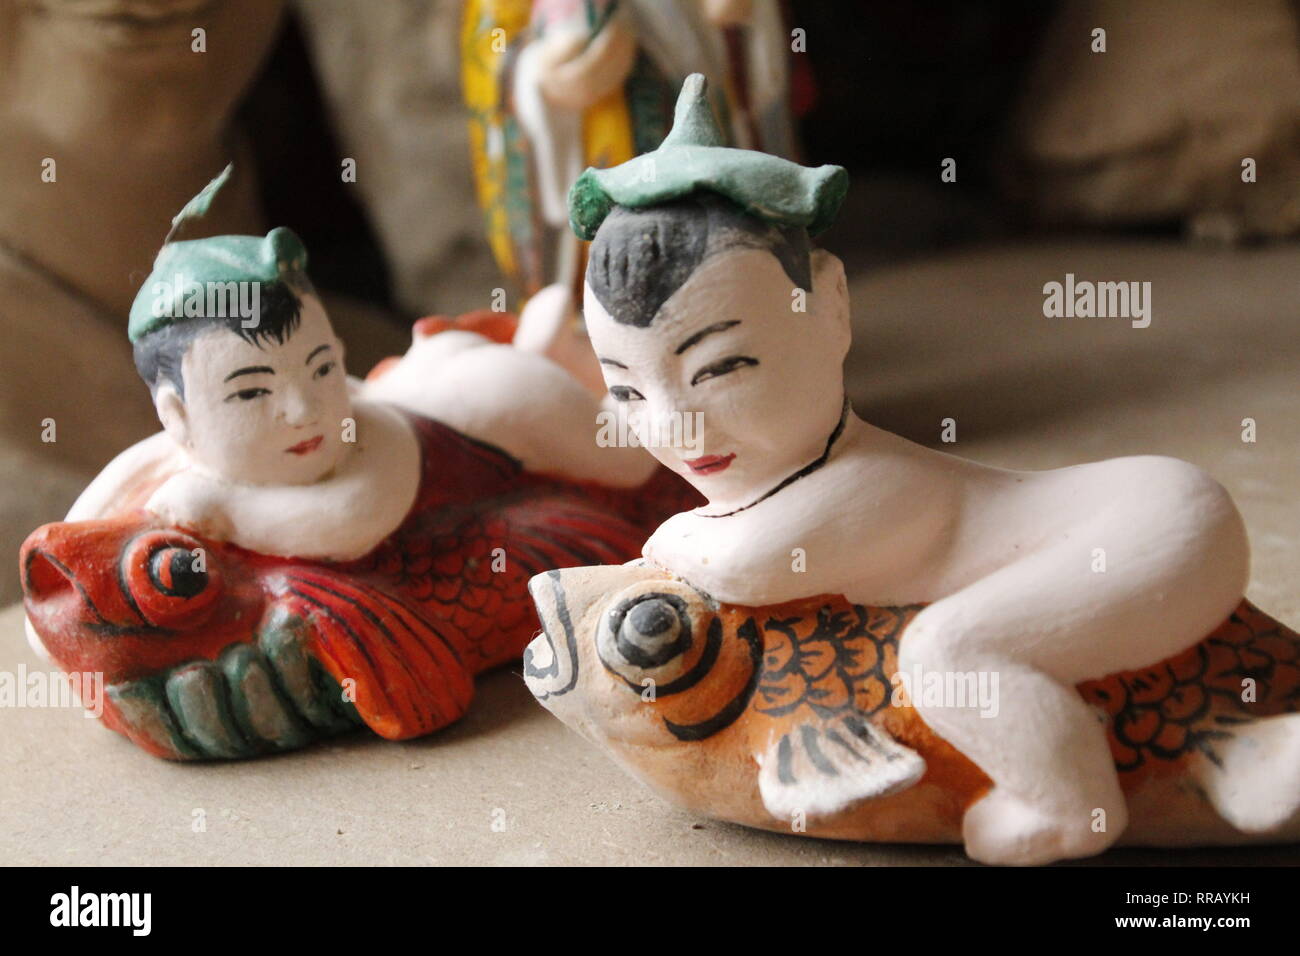 Pingliang, Pingliang, China. 25th Feb, 2019. Pingliang, CHINA-The artist Wu Jianguo makes clay sculptures in Pingliang, northwest ChinaÃ¢â‚¬â„¢s Gansu Province. Credit: SIPA Asia/ZUMA Wire/Alamy Live News Stock Photo